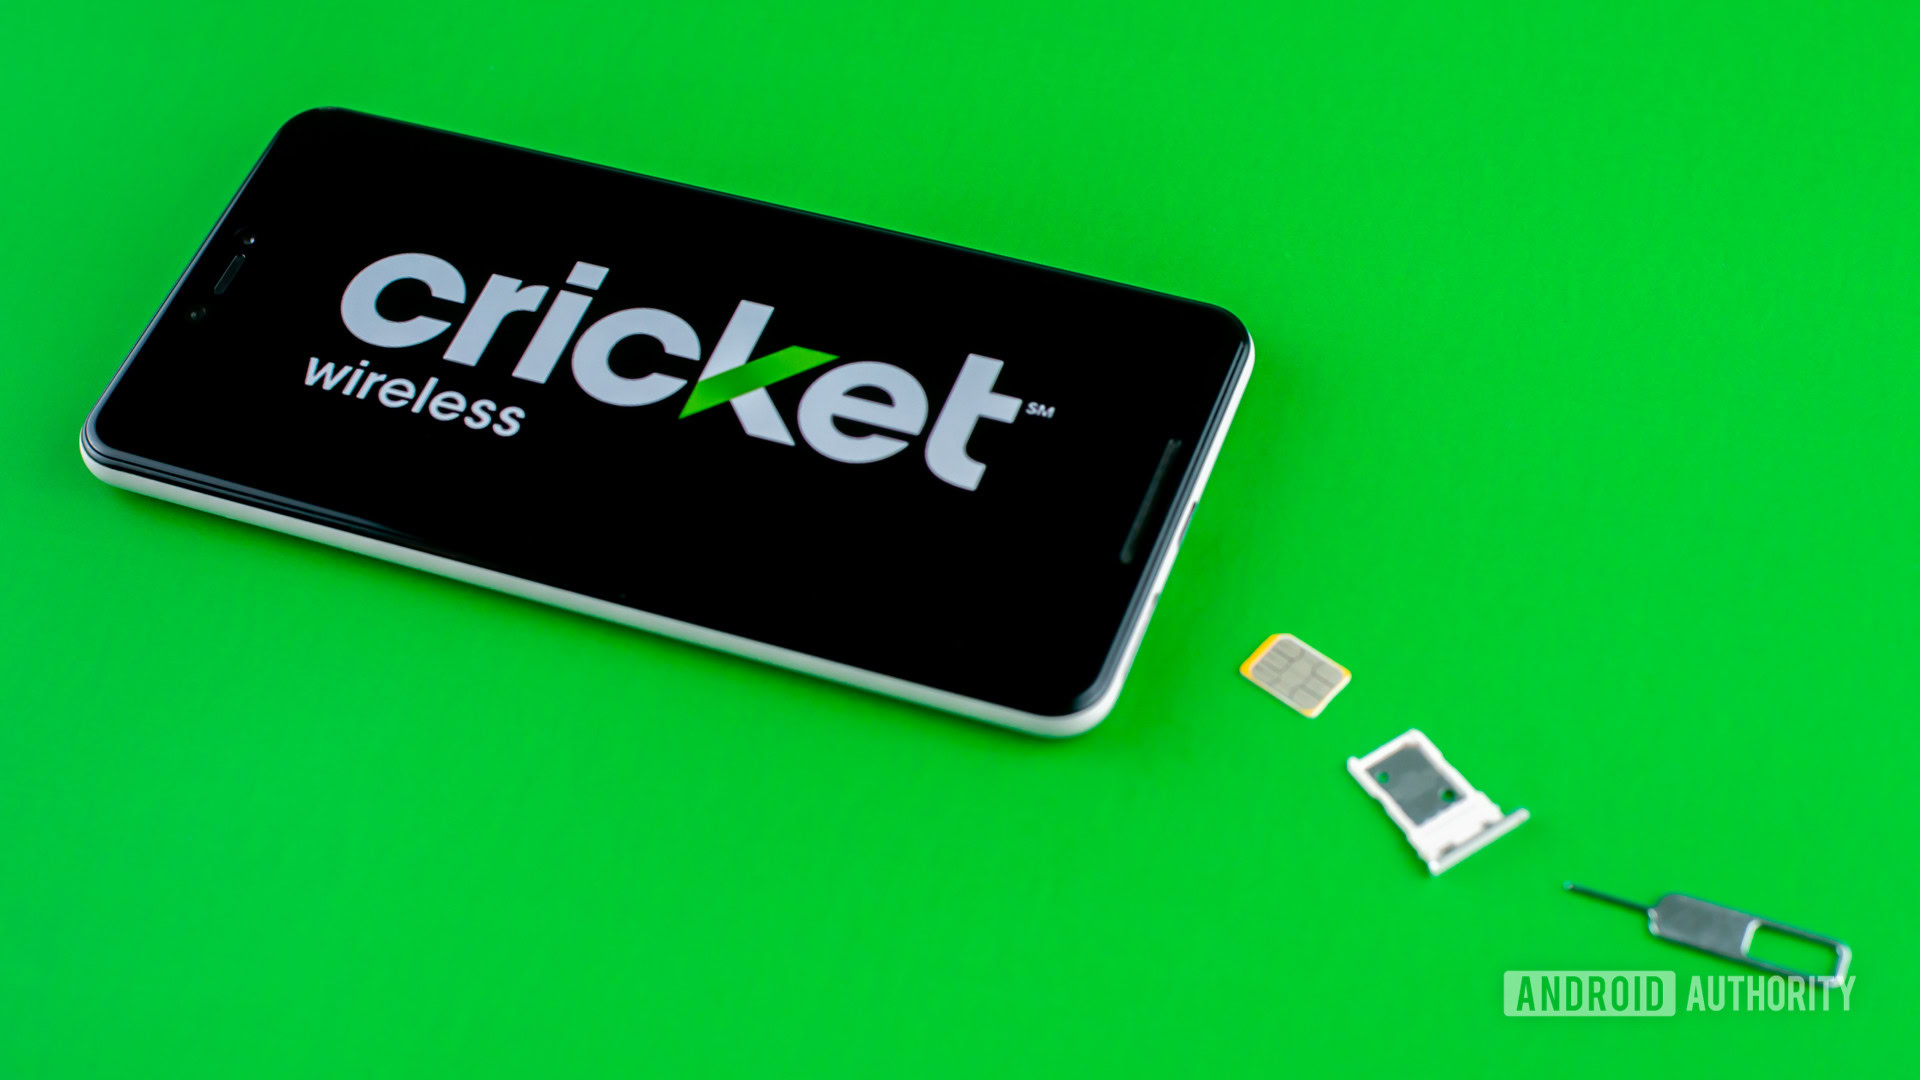 cricket touch screen phones 2022